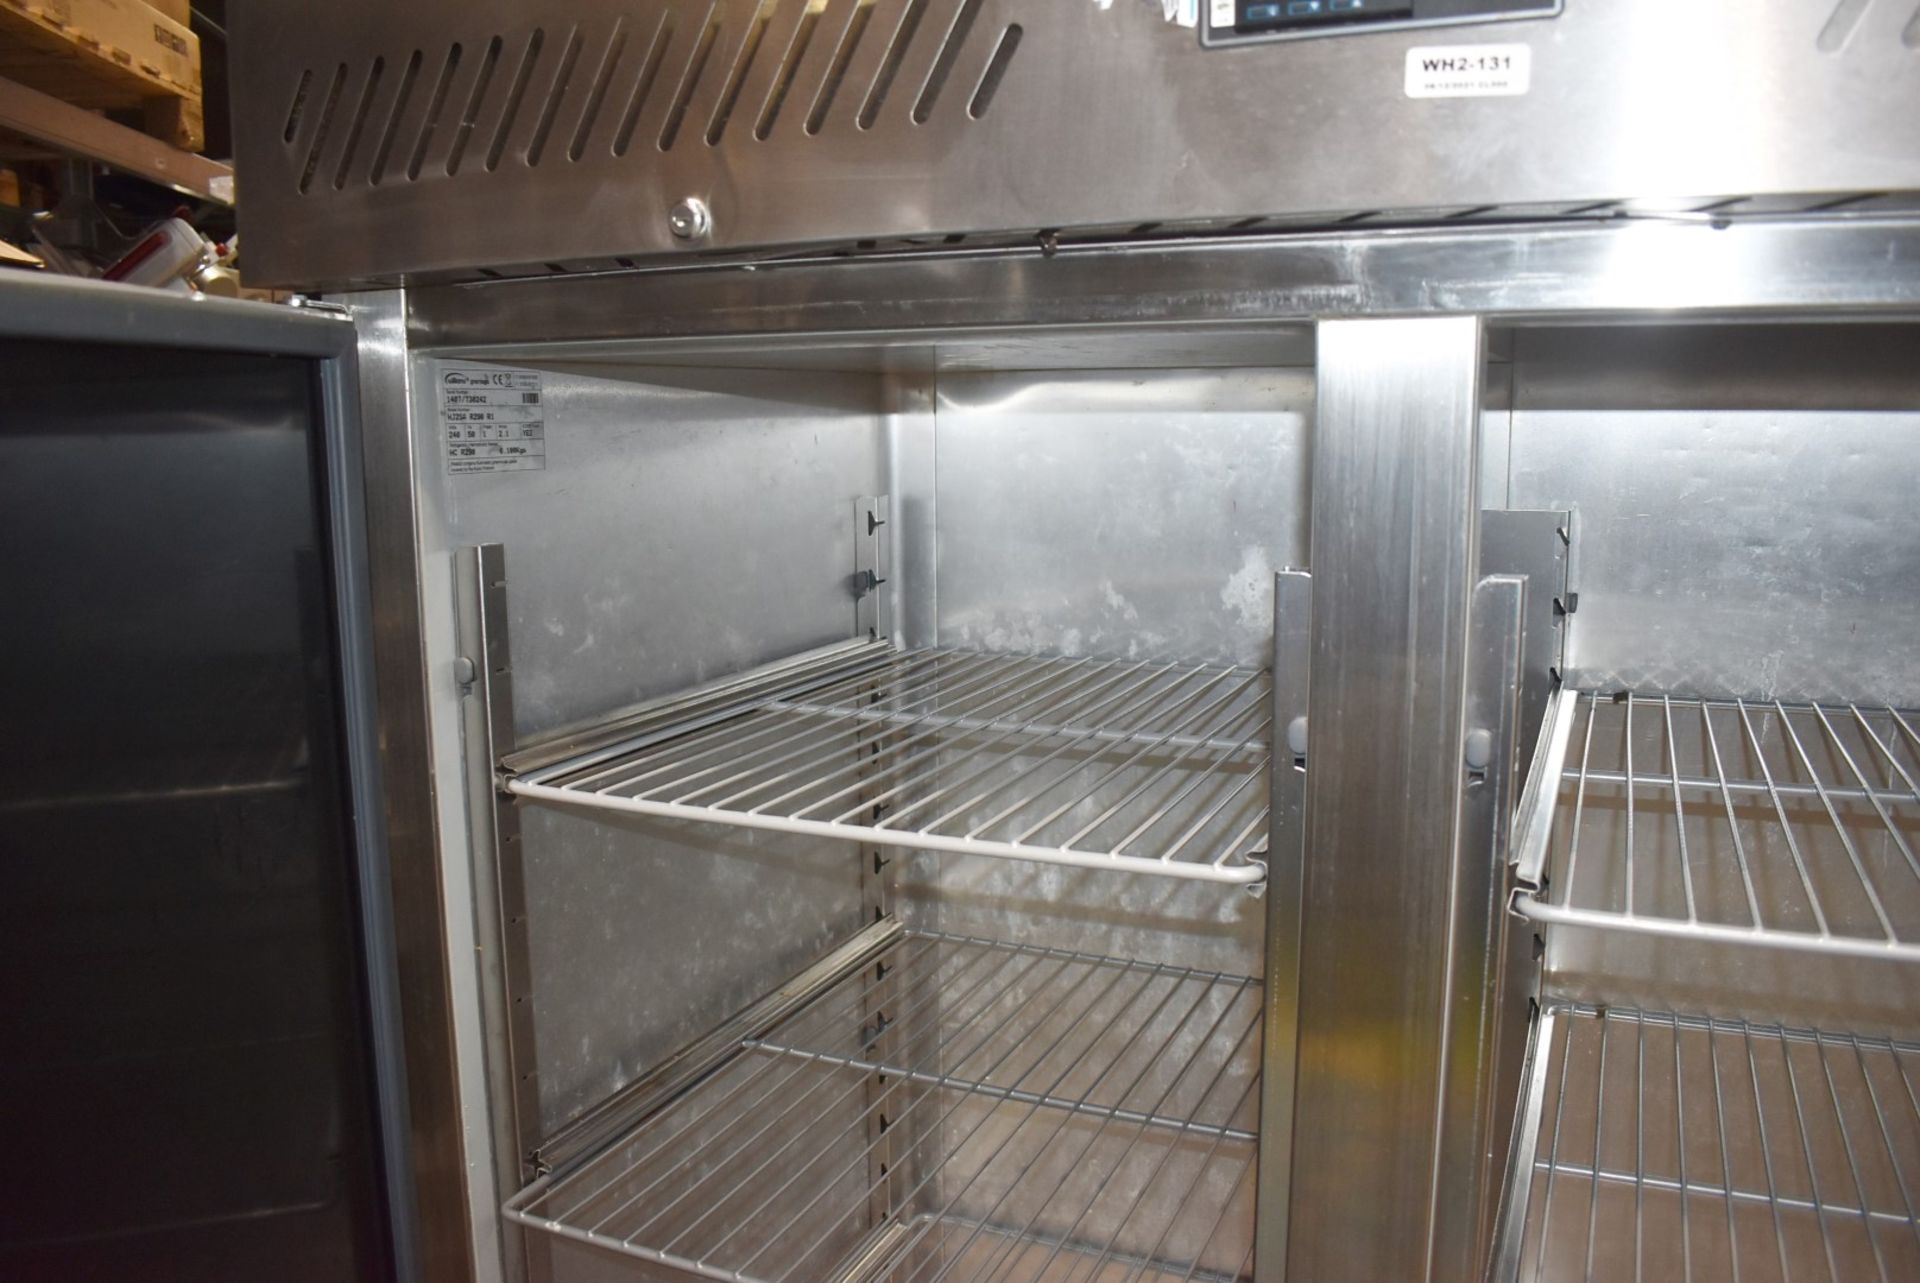 1 x Williams Upright Double Door Refrigerator With Stainless Steel Exterior - Model HS2SA - Recently - Image 7 of 20